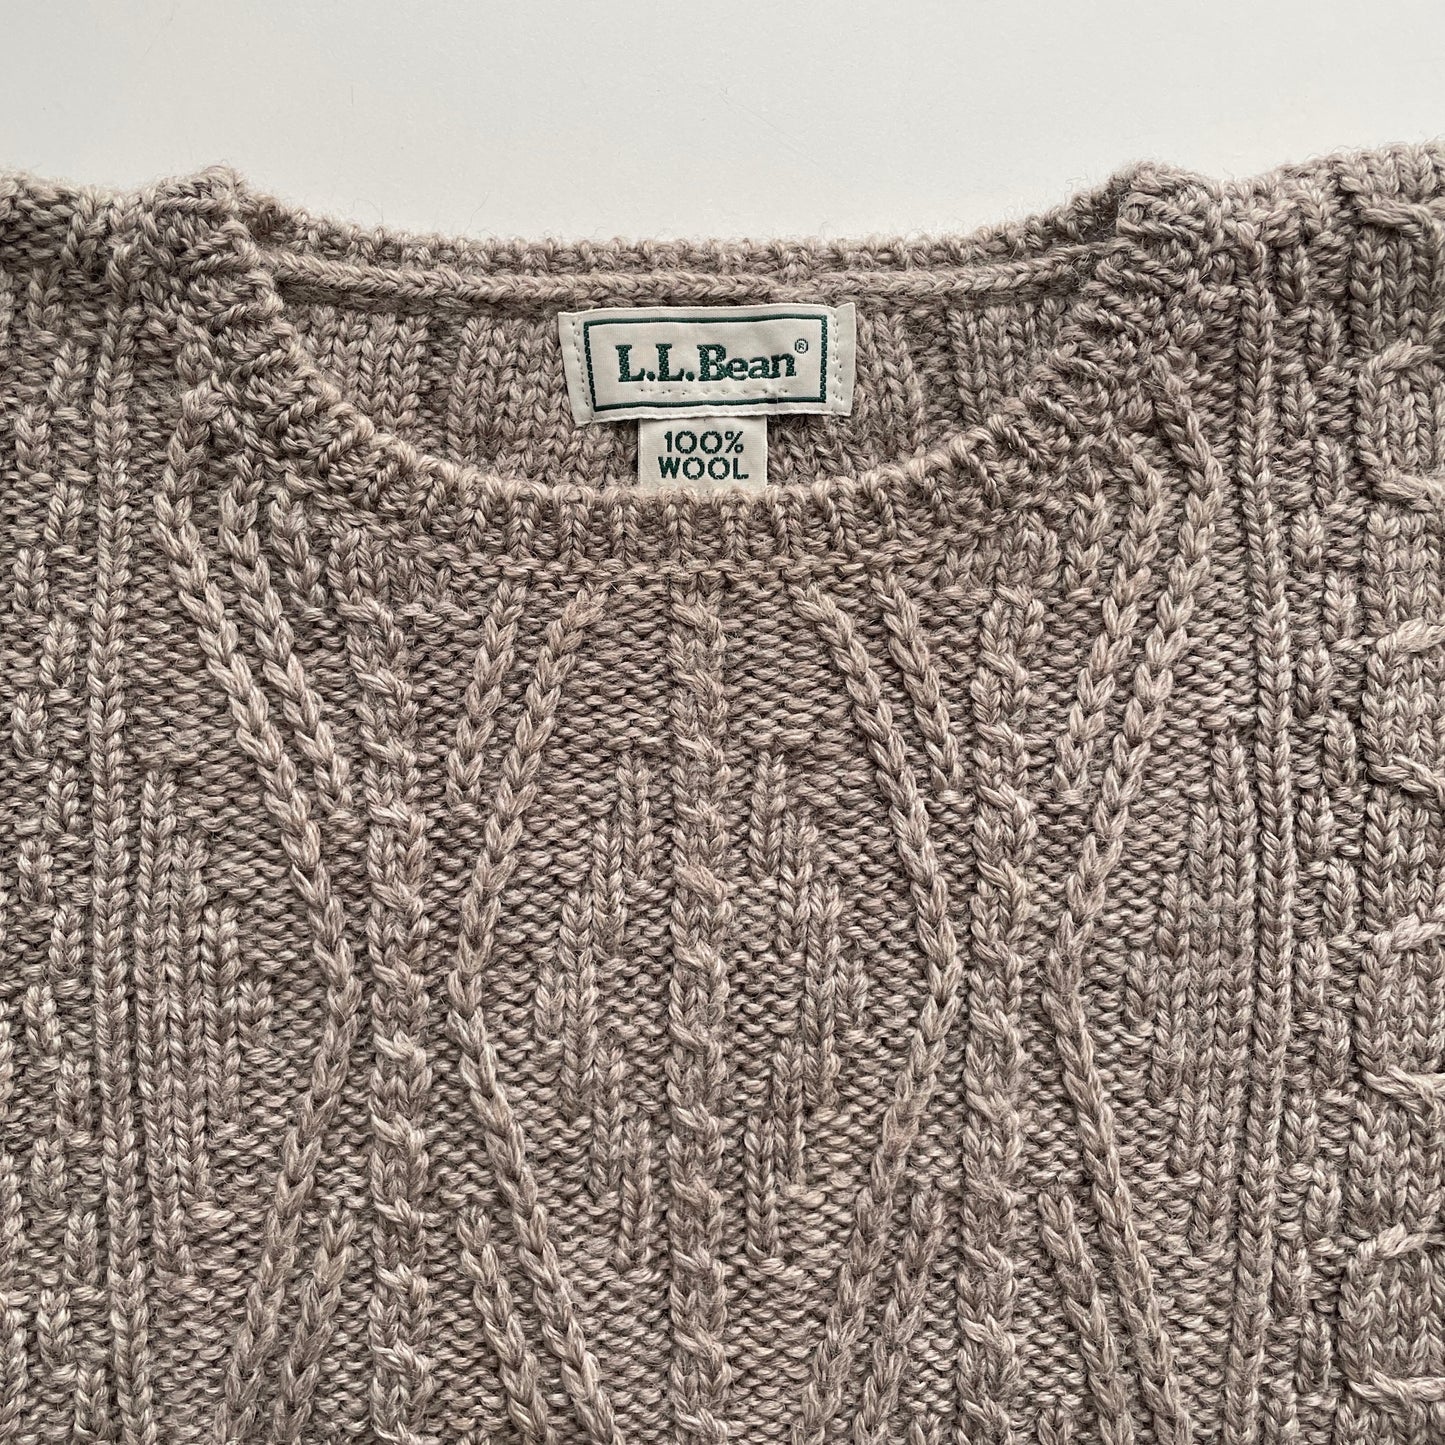 Vintage L.L. Bean Taupe Wool Cable Knit Sweater Made in Ireland M